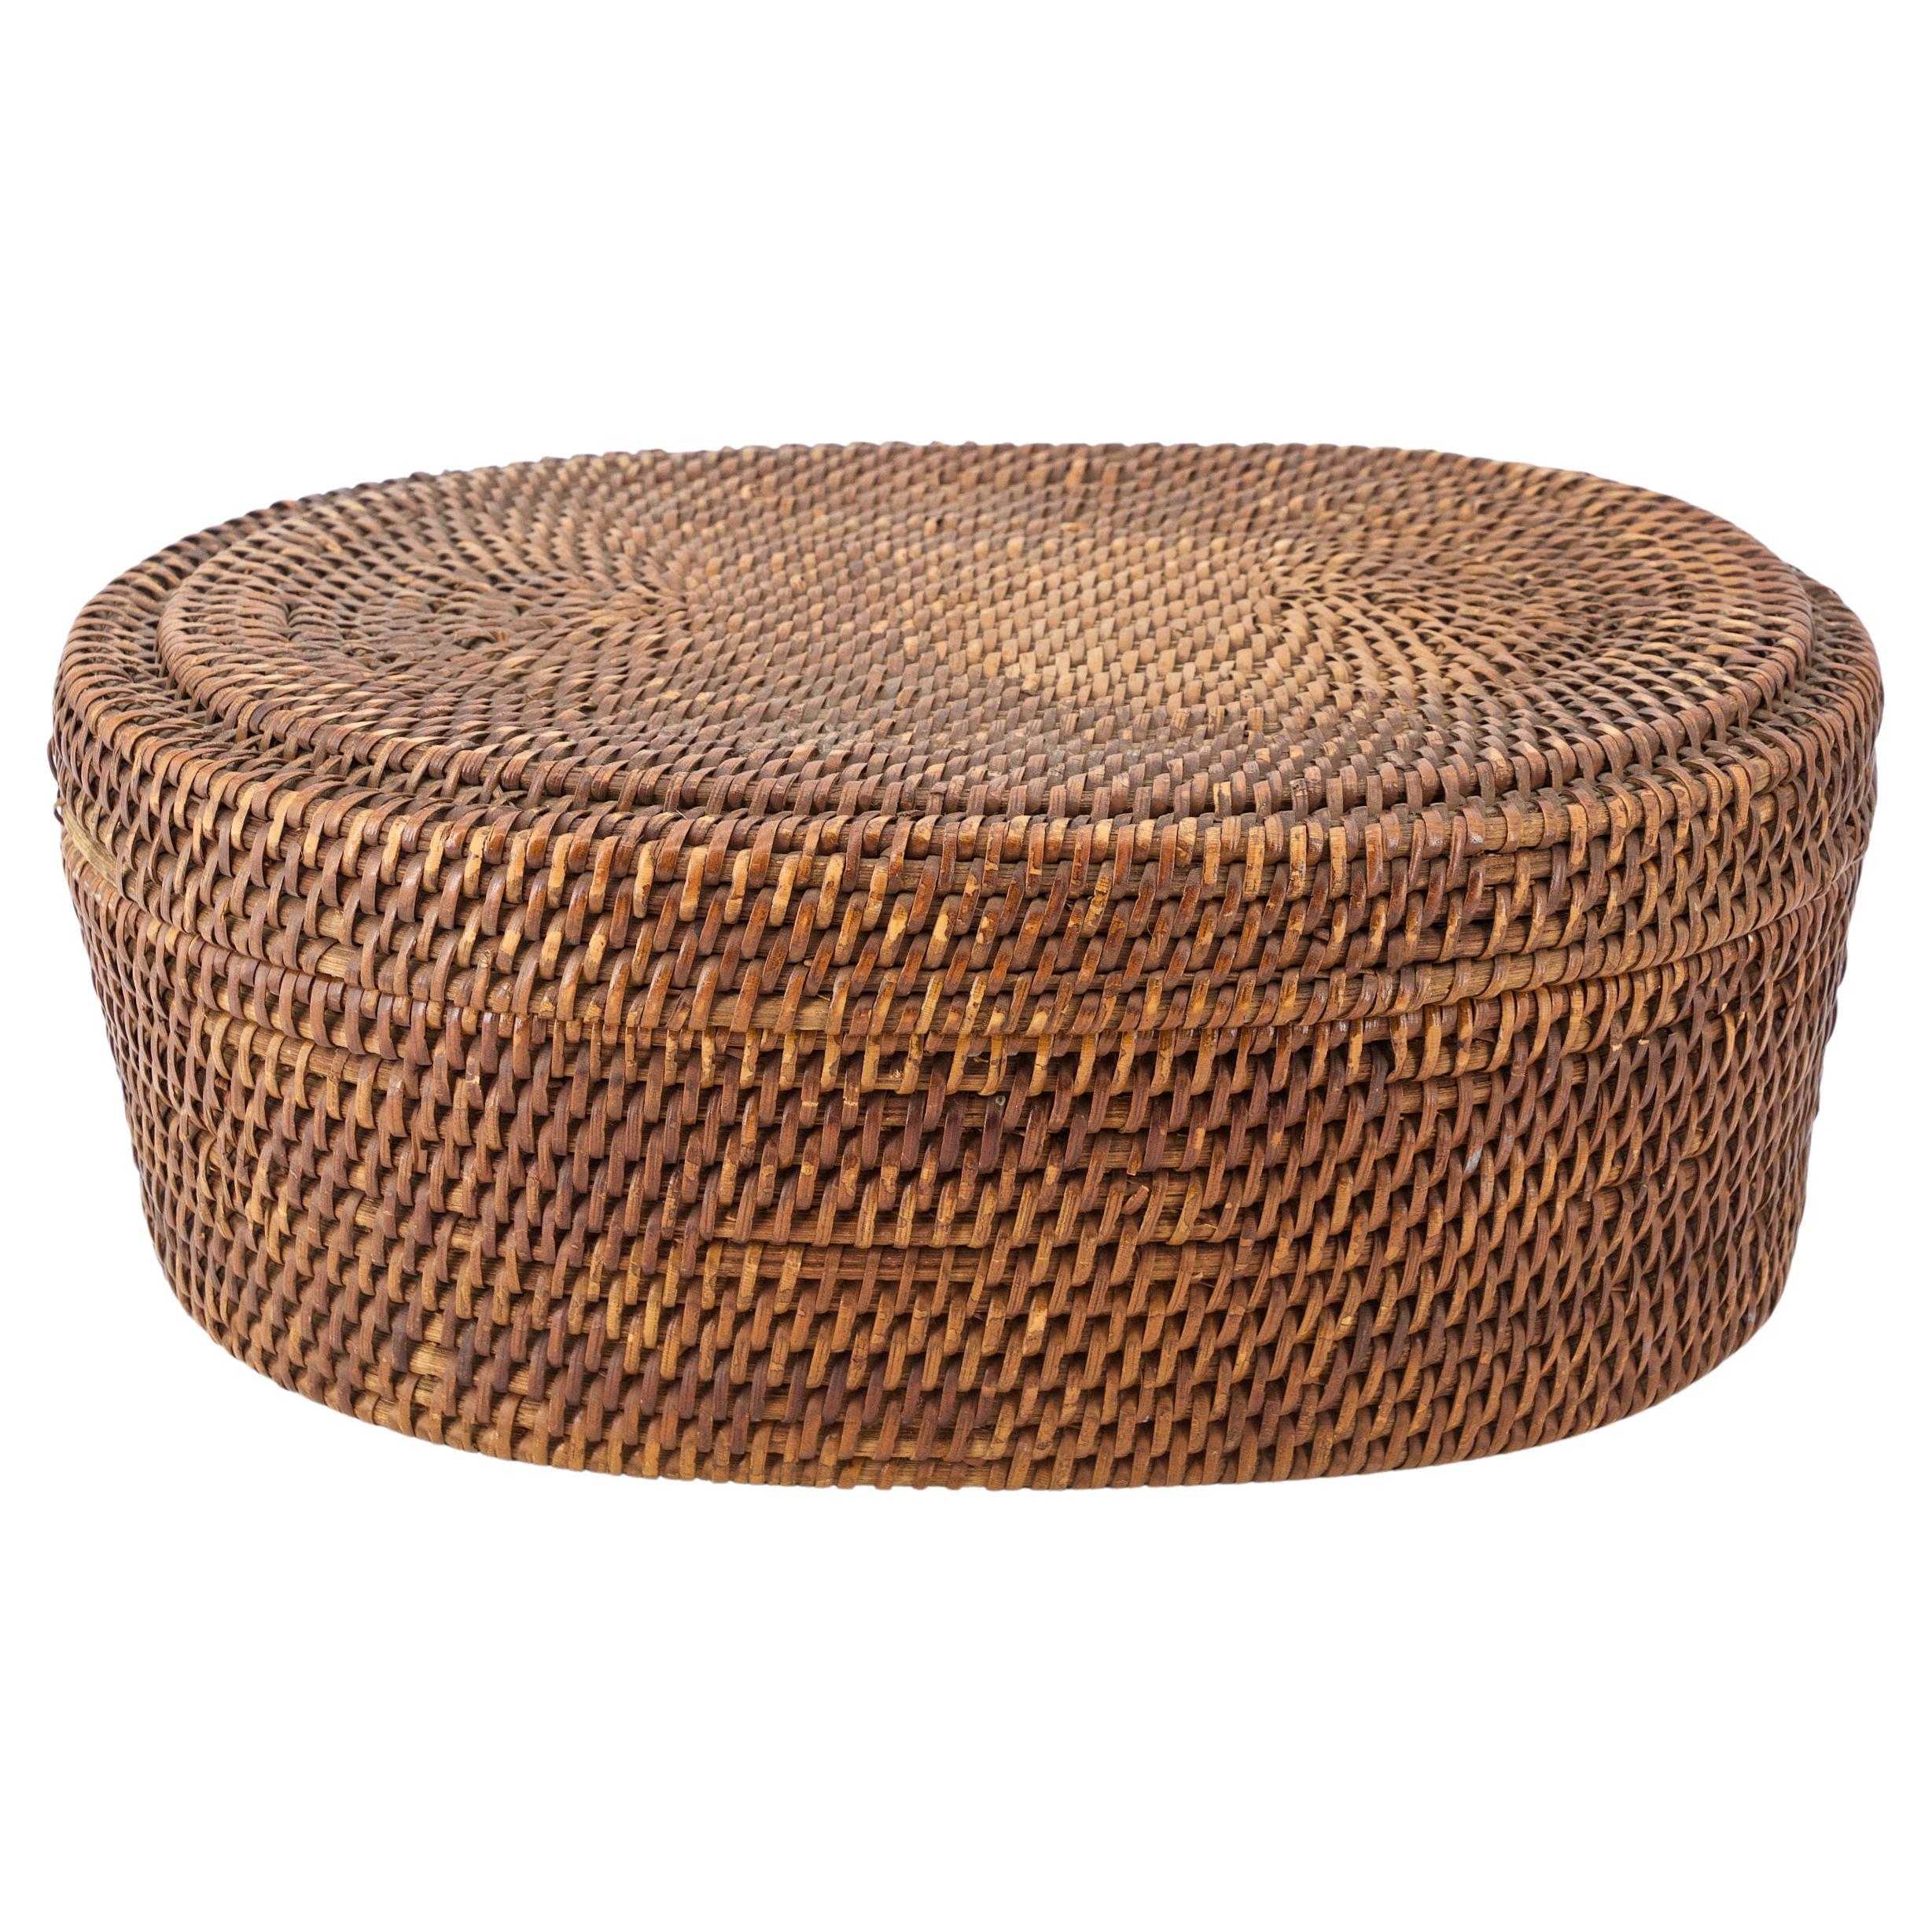 Native American Indian Woven Coiled Lidded Oval Basket